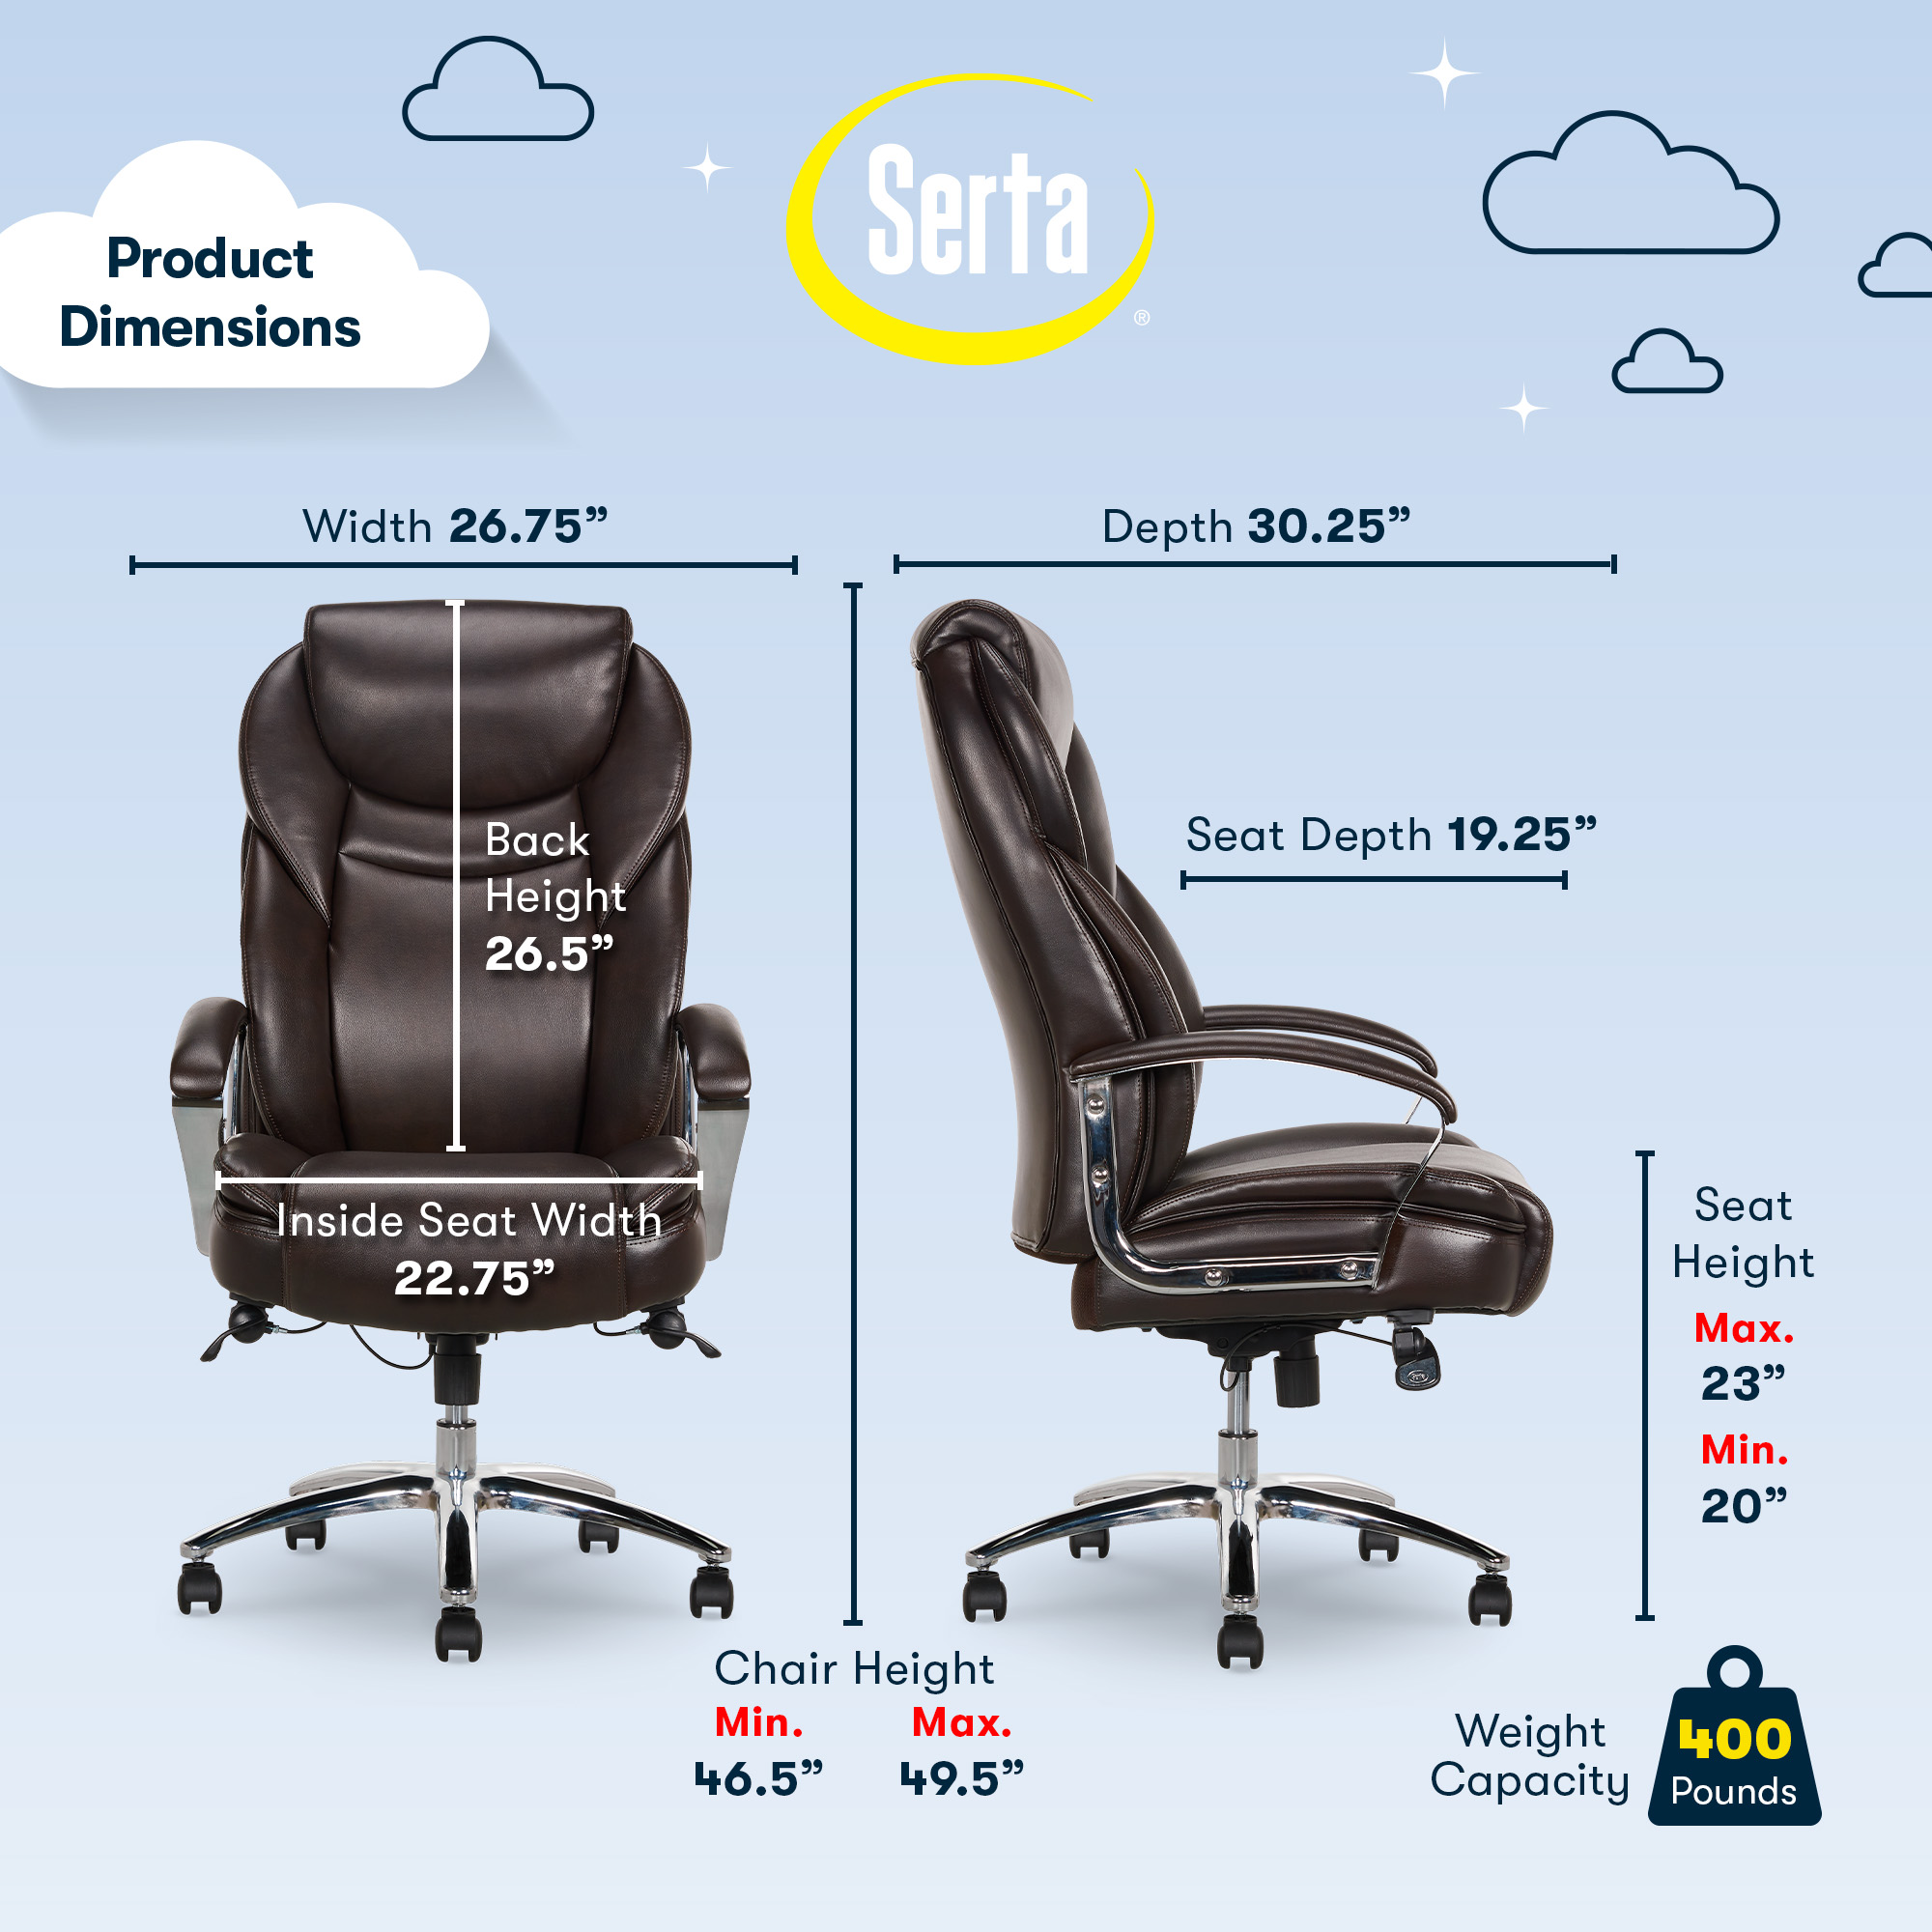 Serta Big & Tall High Back Office Chair, Heavy Duty Weight Rating, Brown Bonded Leather Upholstery - image 3 of 14